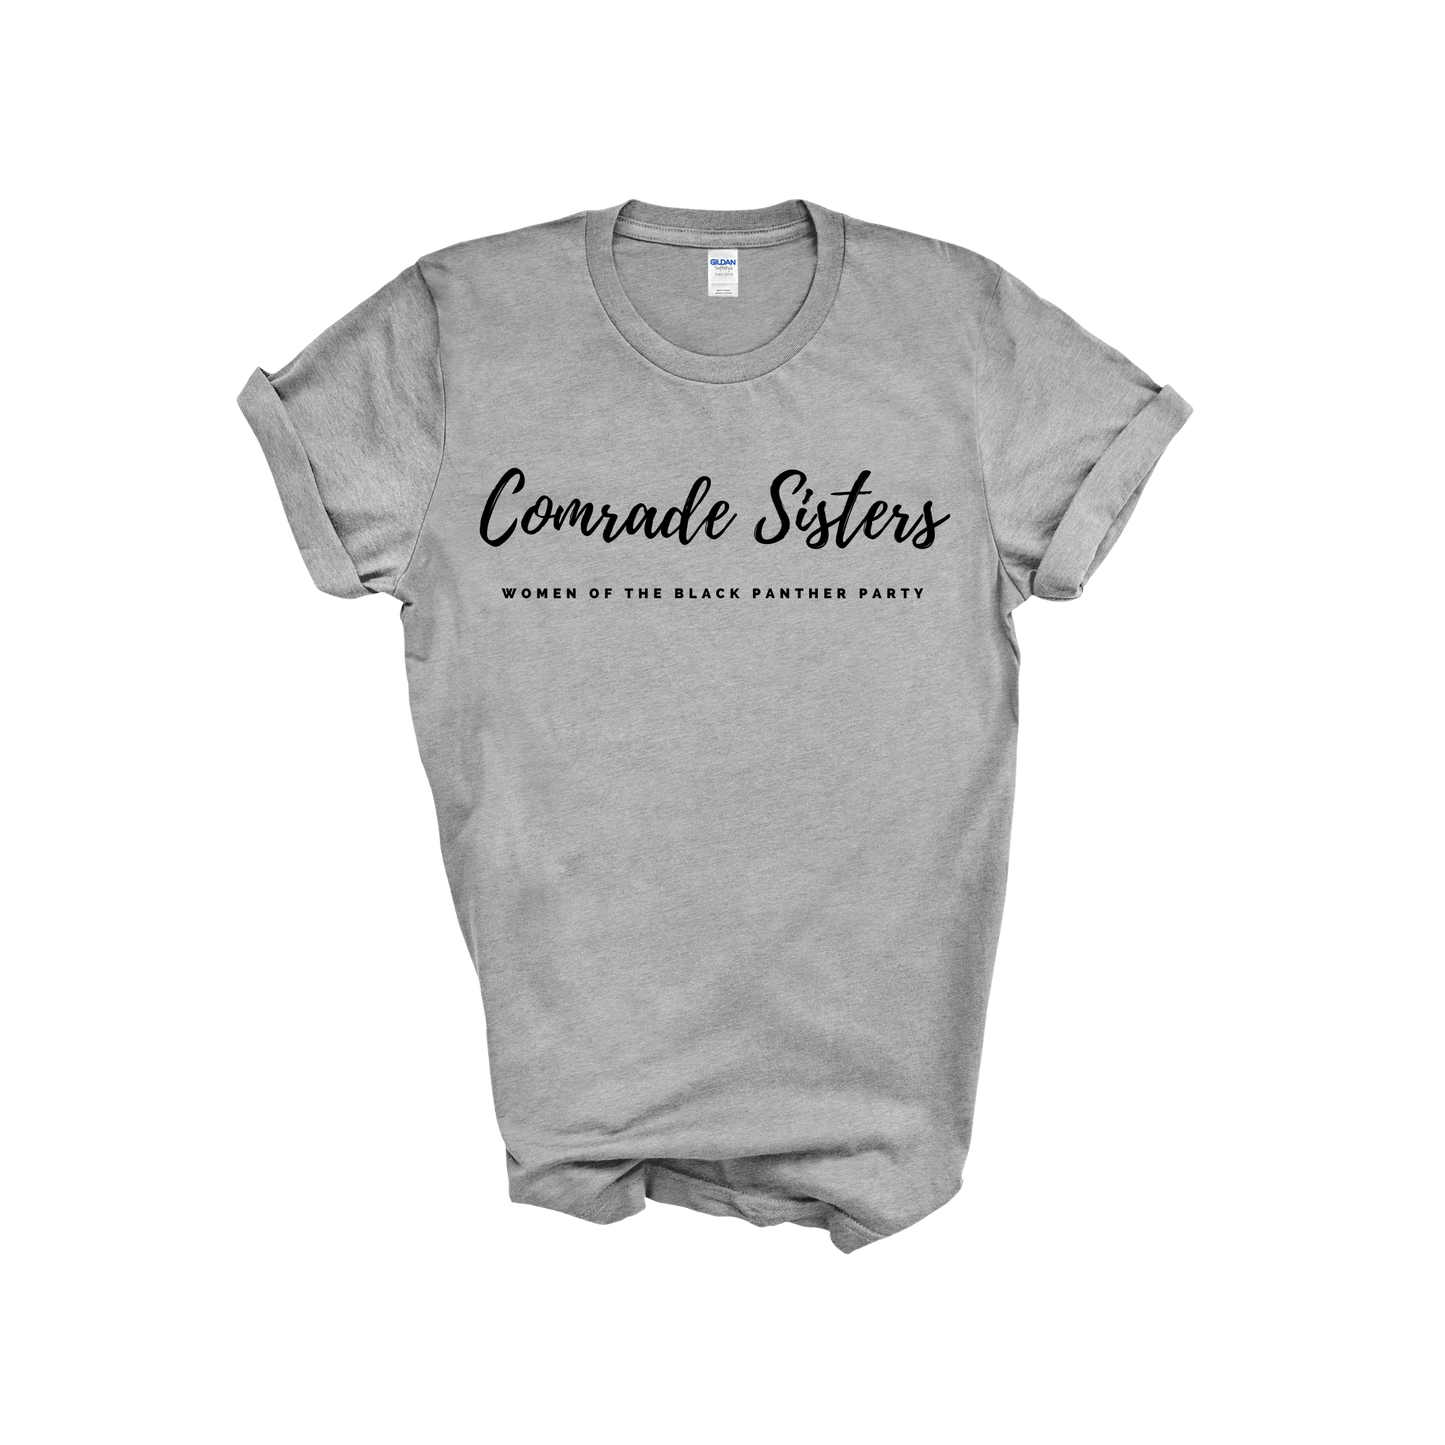 Commemorative Comrade Sisters Women of the Black Panther Party T-Shirt